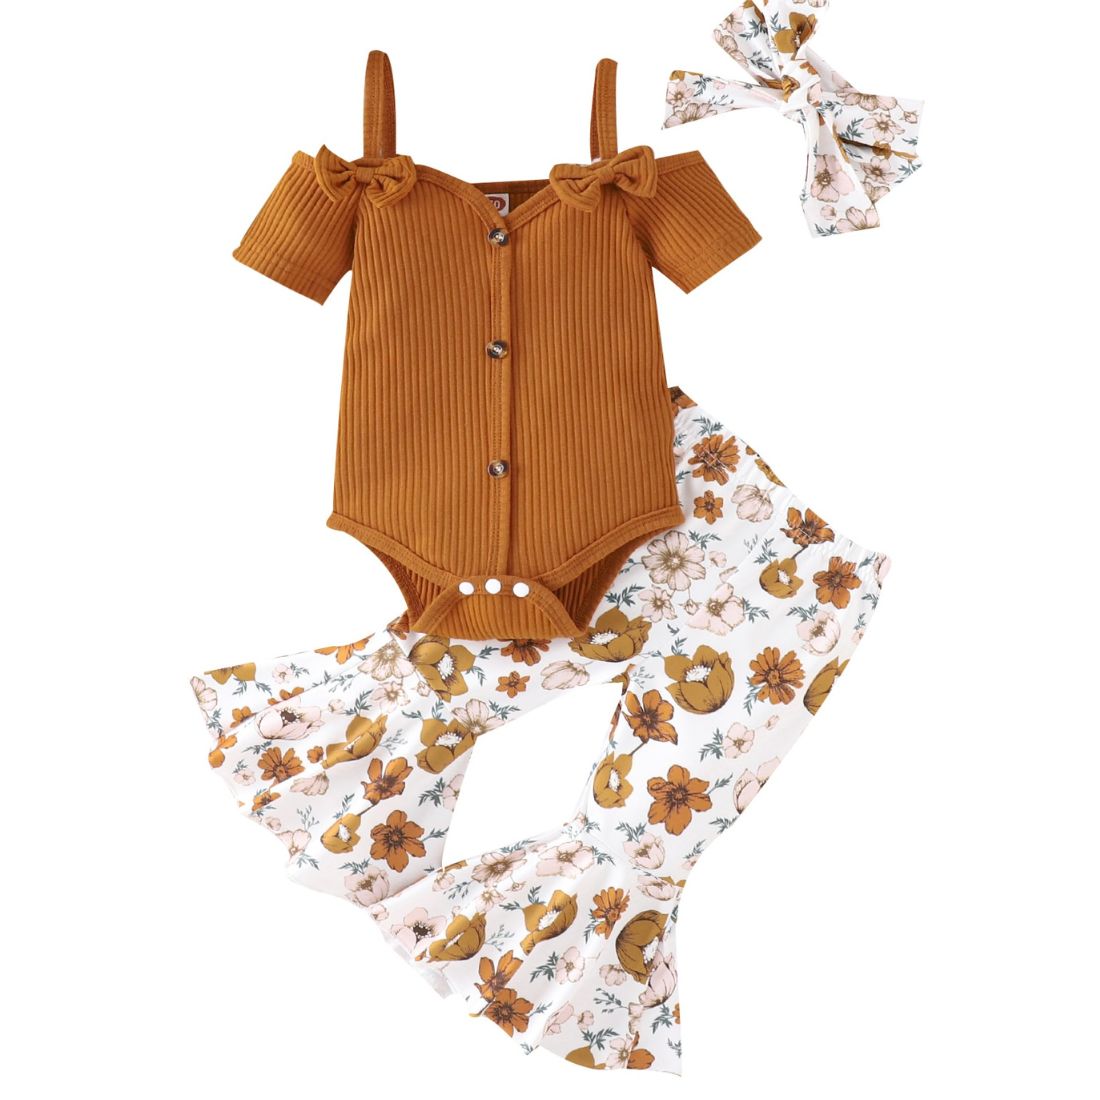 Autumn Floral Flares Baby Clothing Set